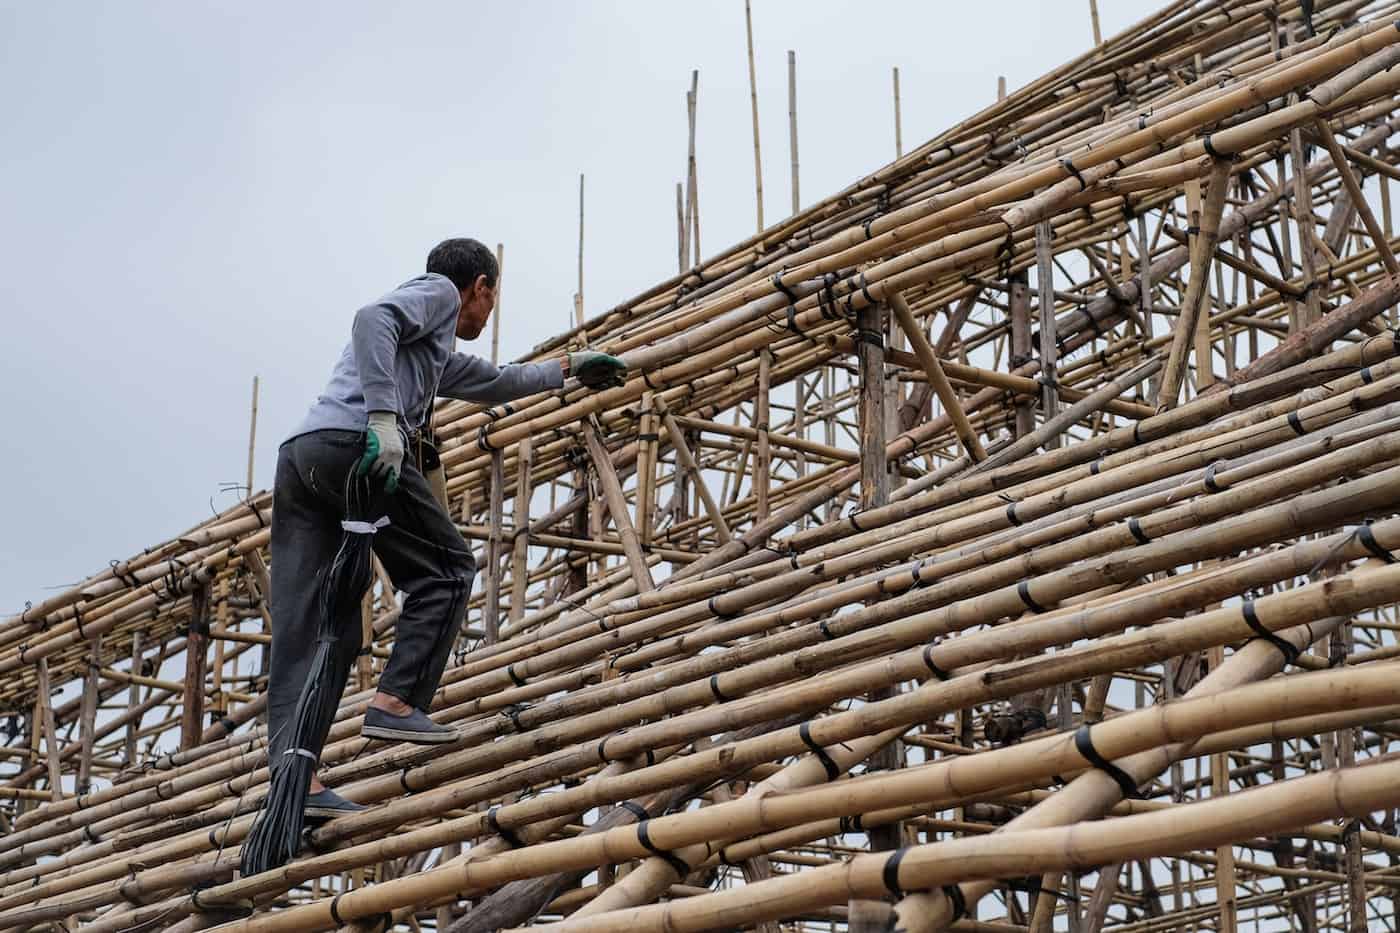 Figure 7 –Wooden or Bamboo Scaffolding